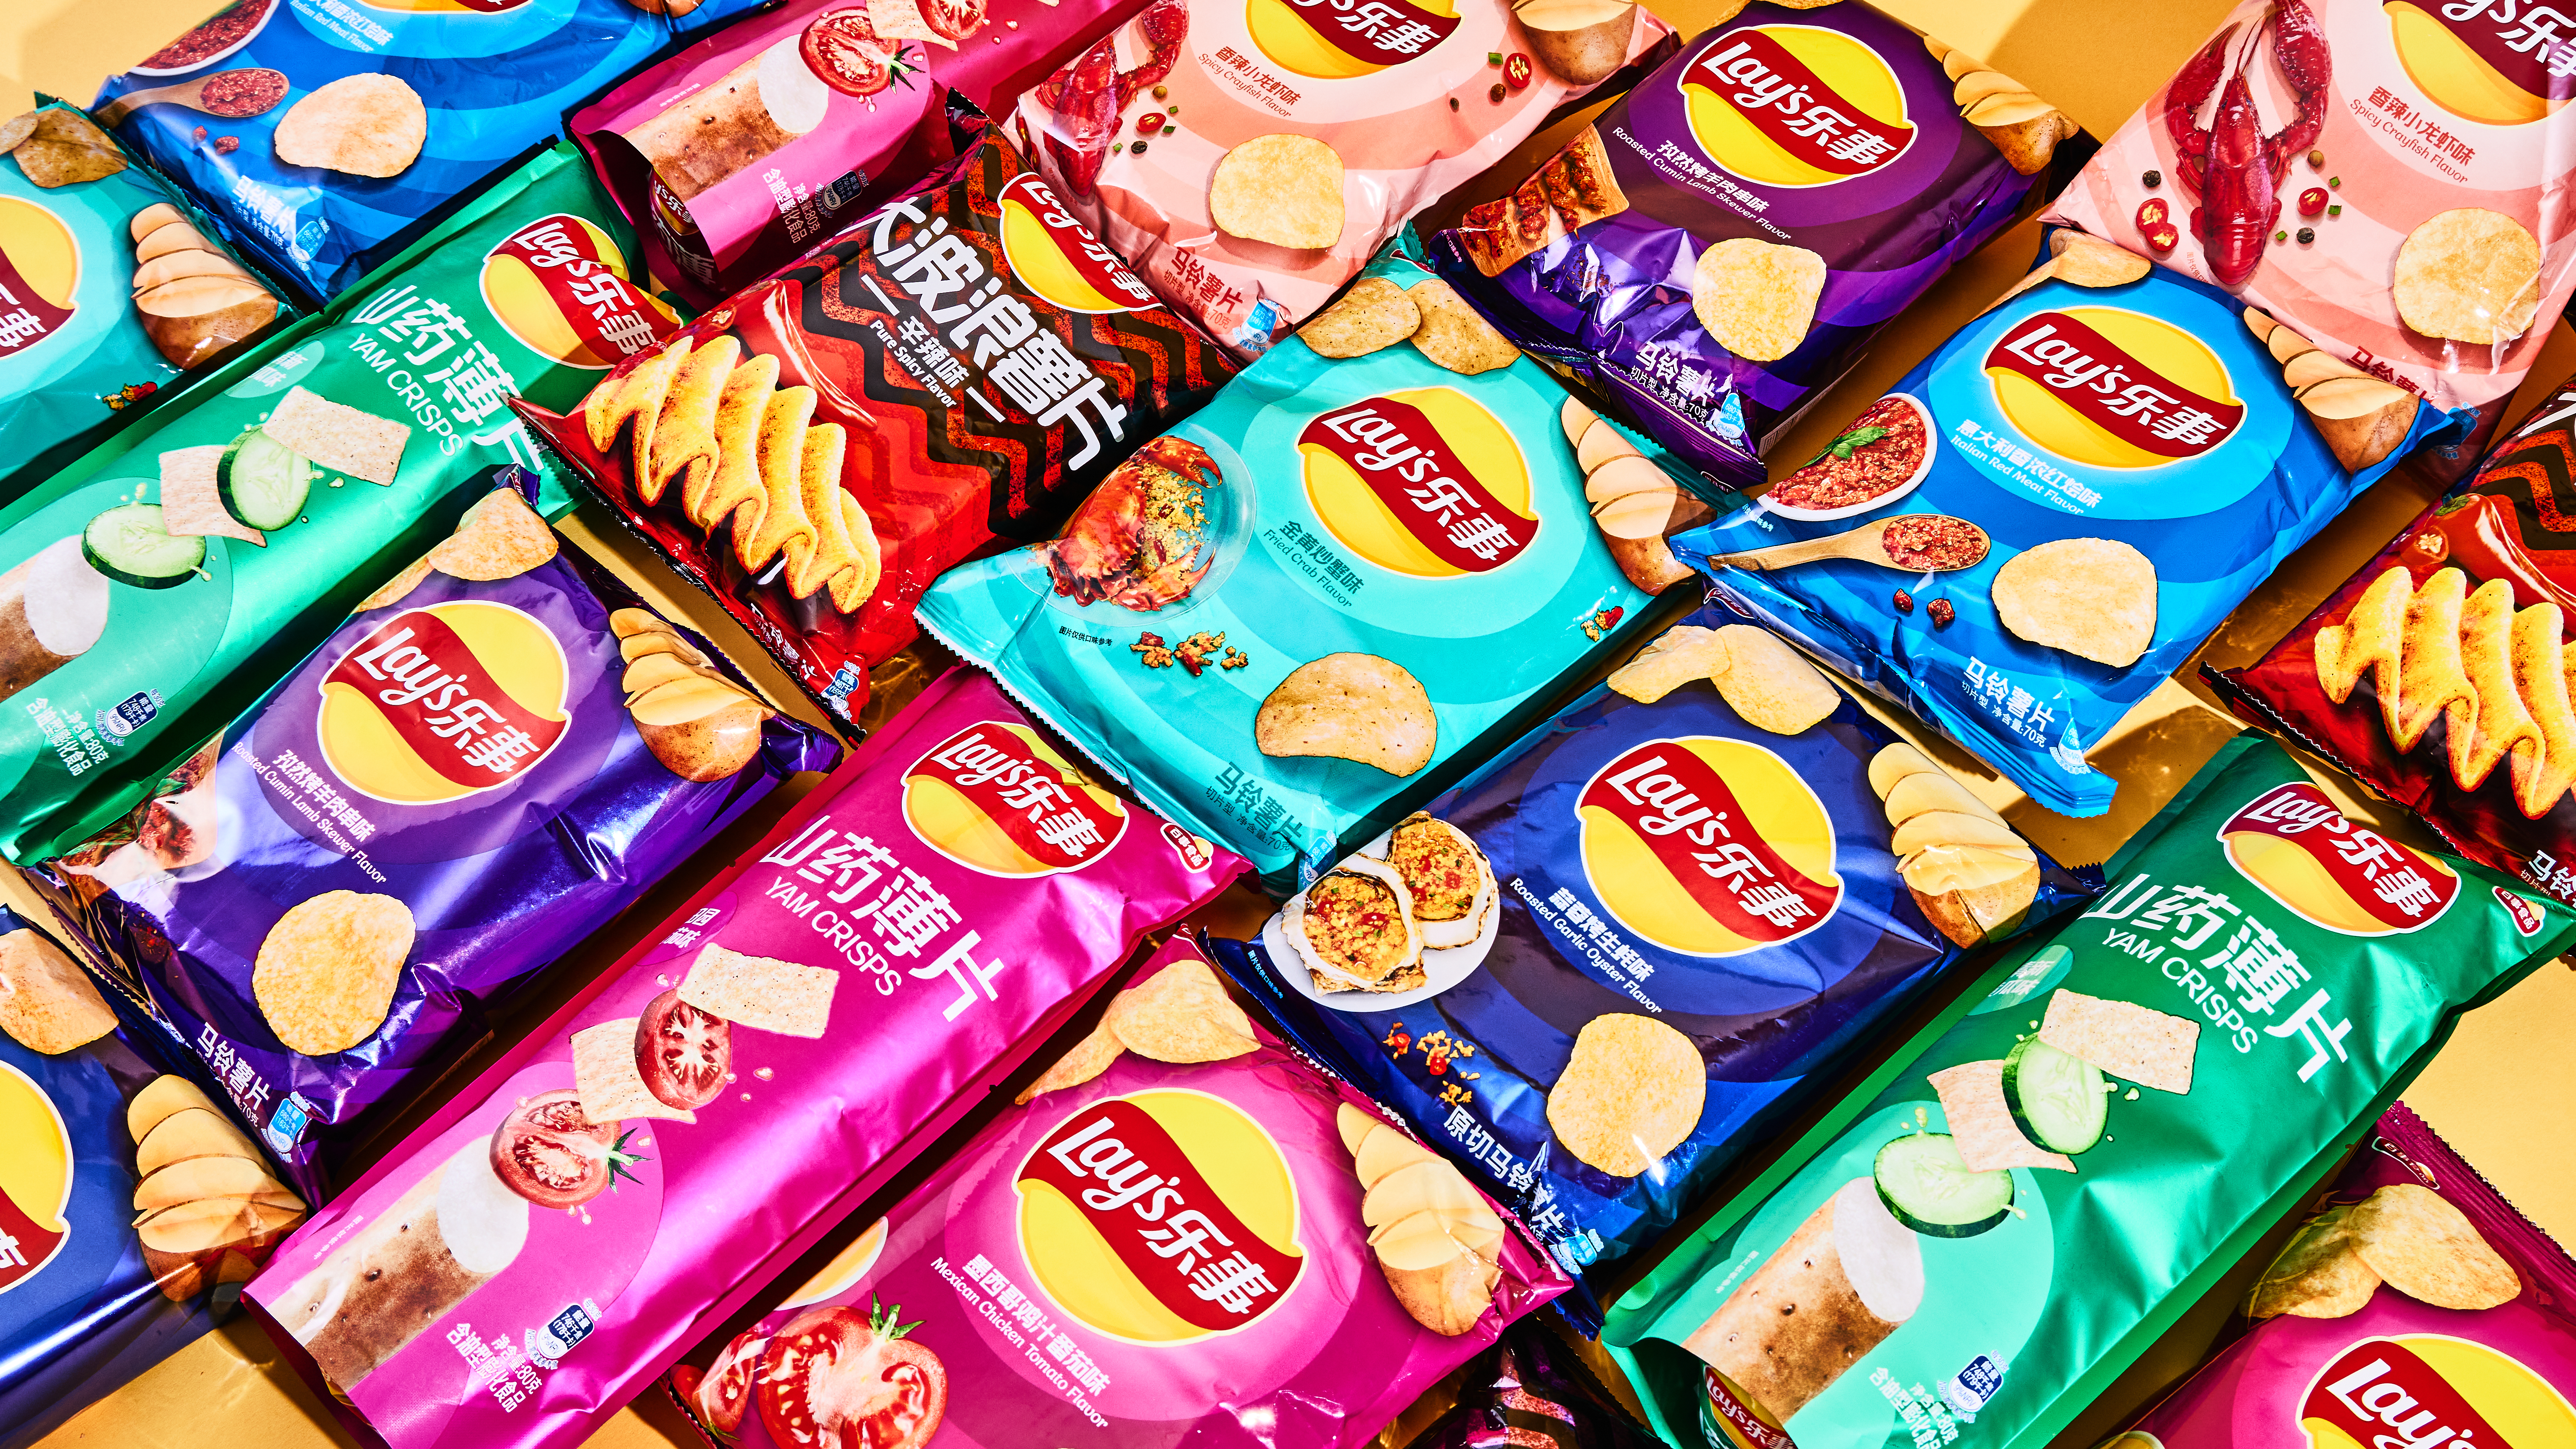 A big, colorful array of packaged Lay’s chips.